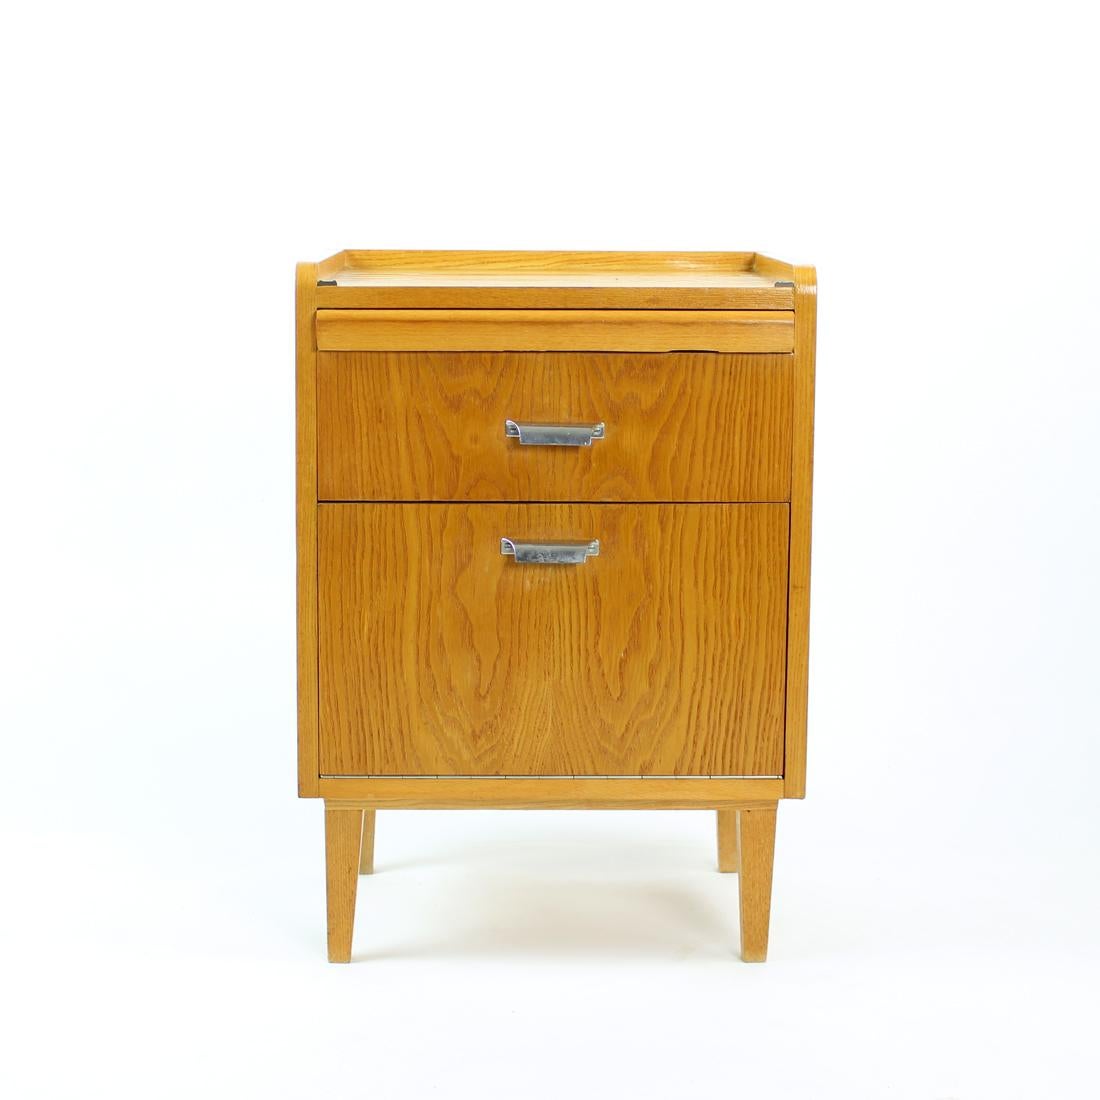 Beautiful small sideboard produced in Czechoslovakia in 1960s. The unit is in a beautiful oak wood veneer in a beautiful condition. The sideboard stands on four strong legs. There is one drawer, one compartment with doors opening on a piano hinges.